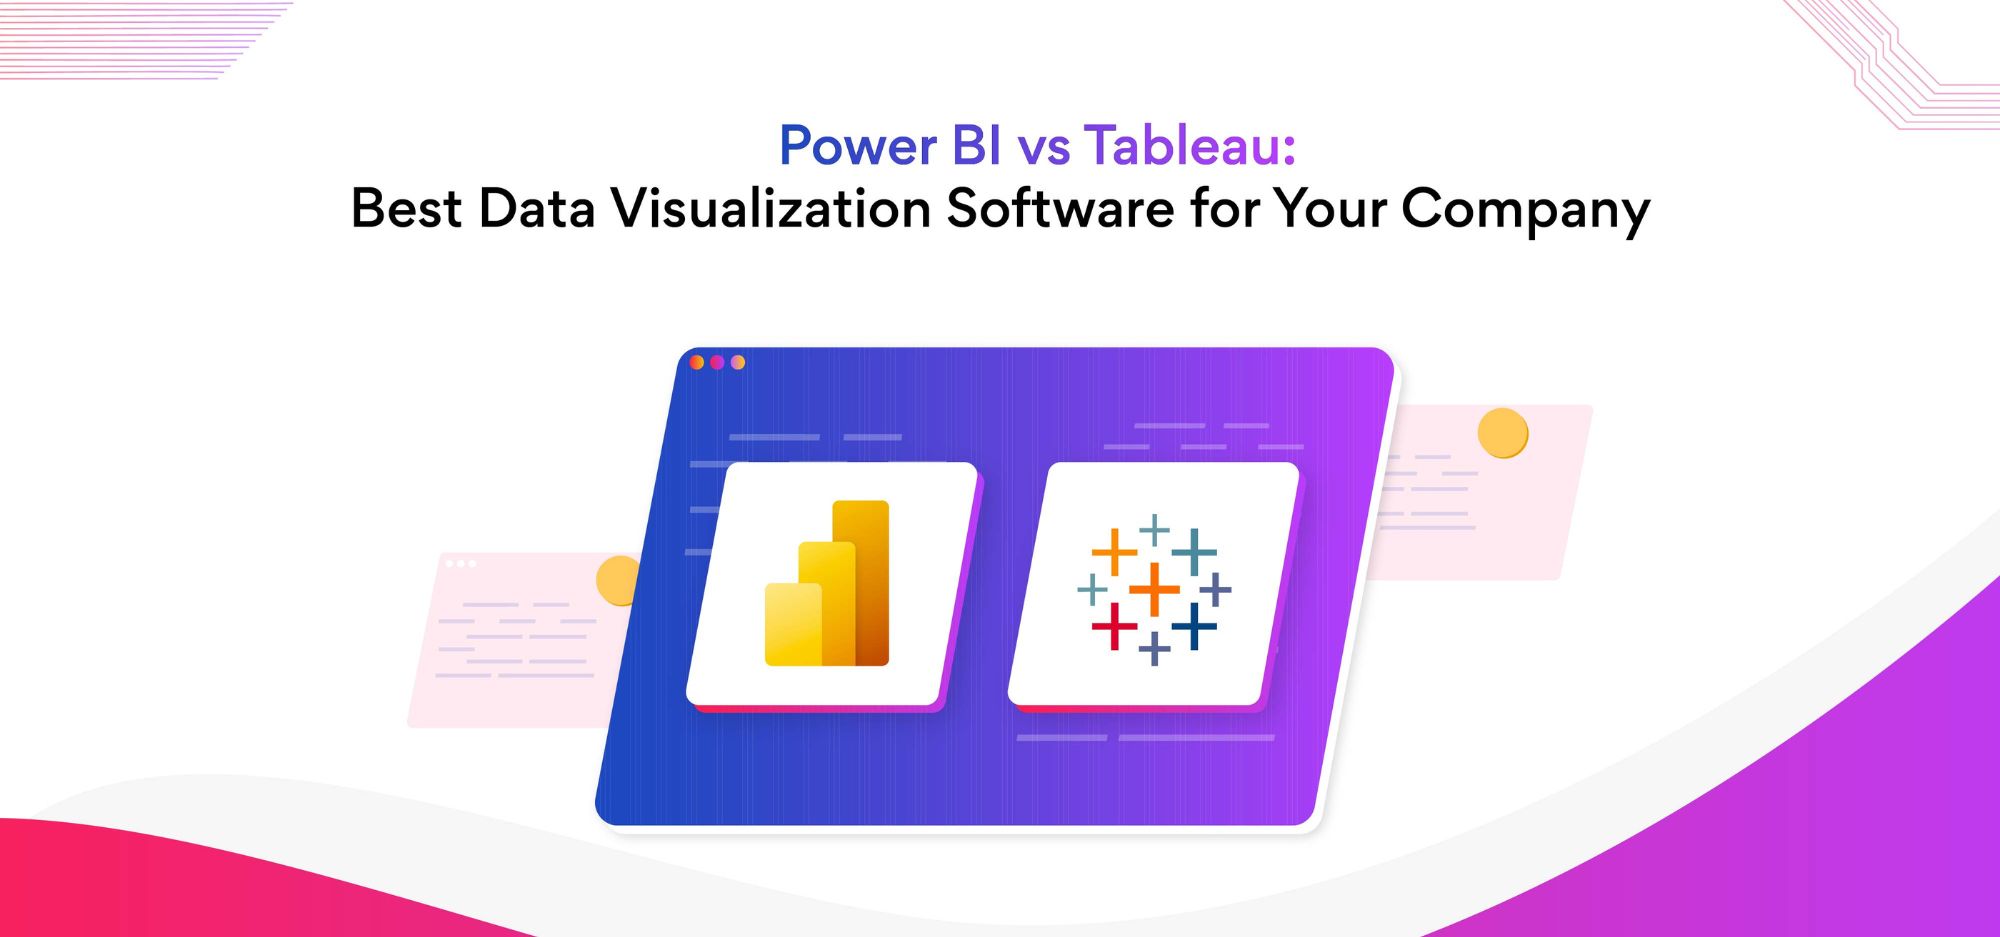 Power BI vs Tableau Best Data Visualization Software for your Company